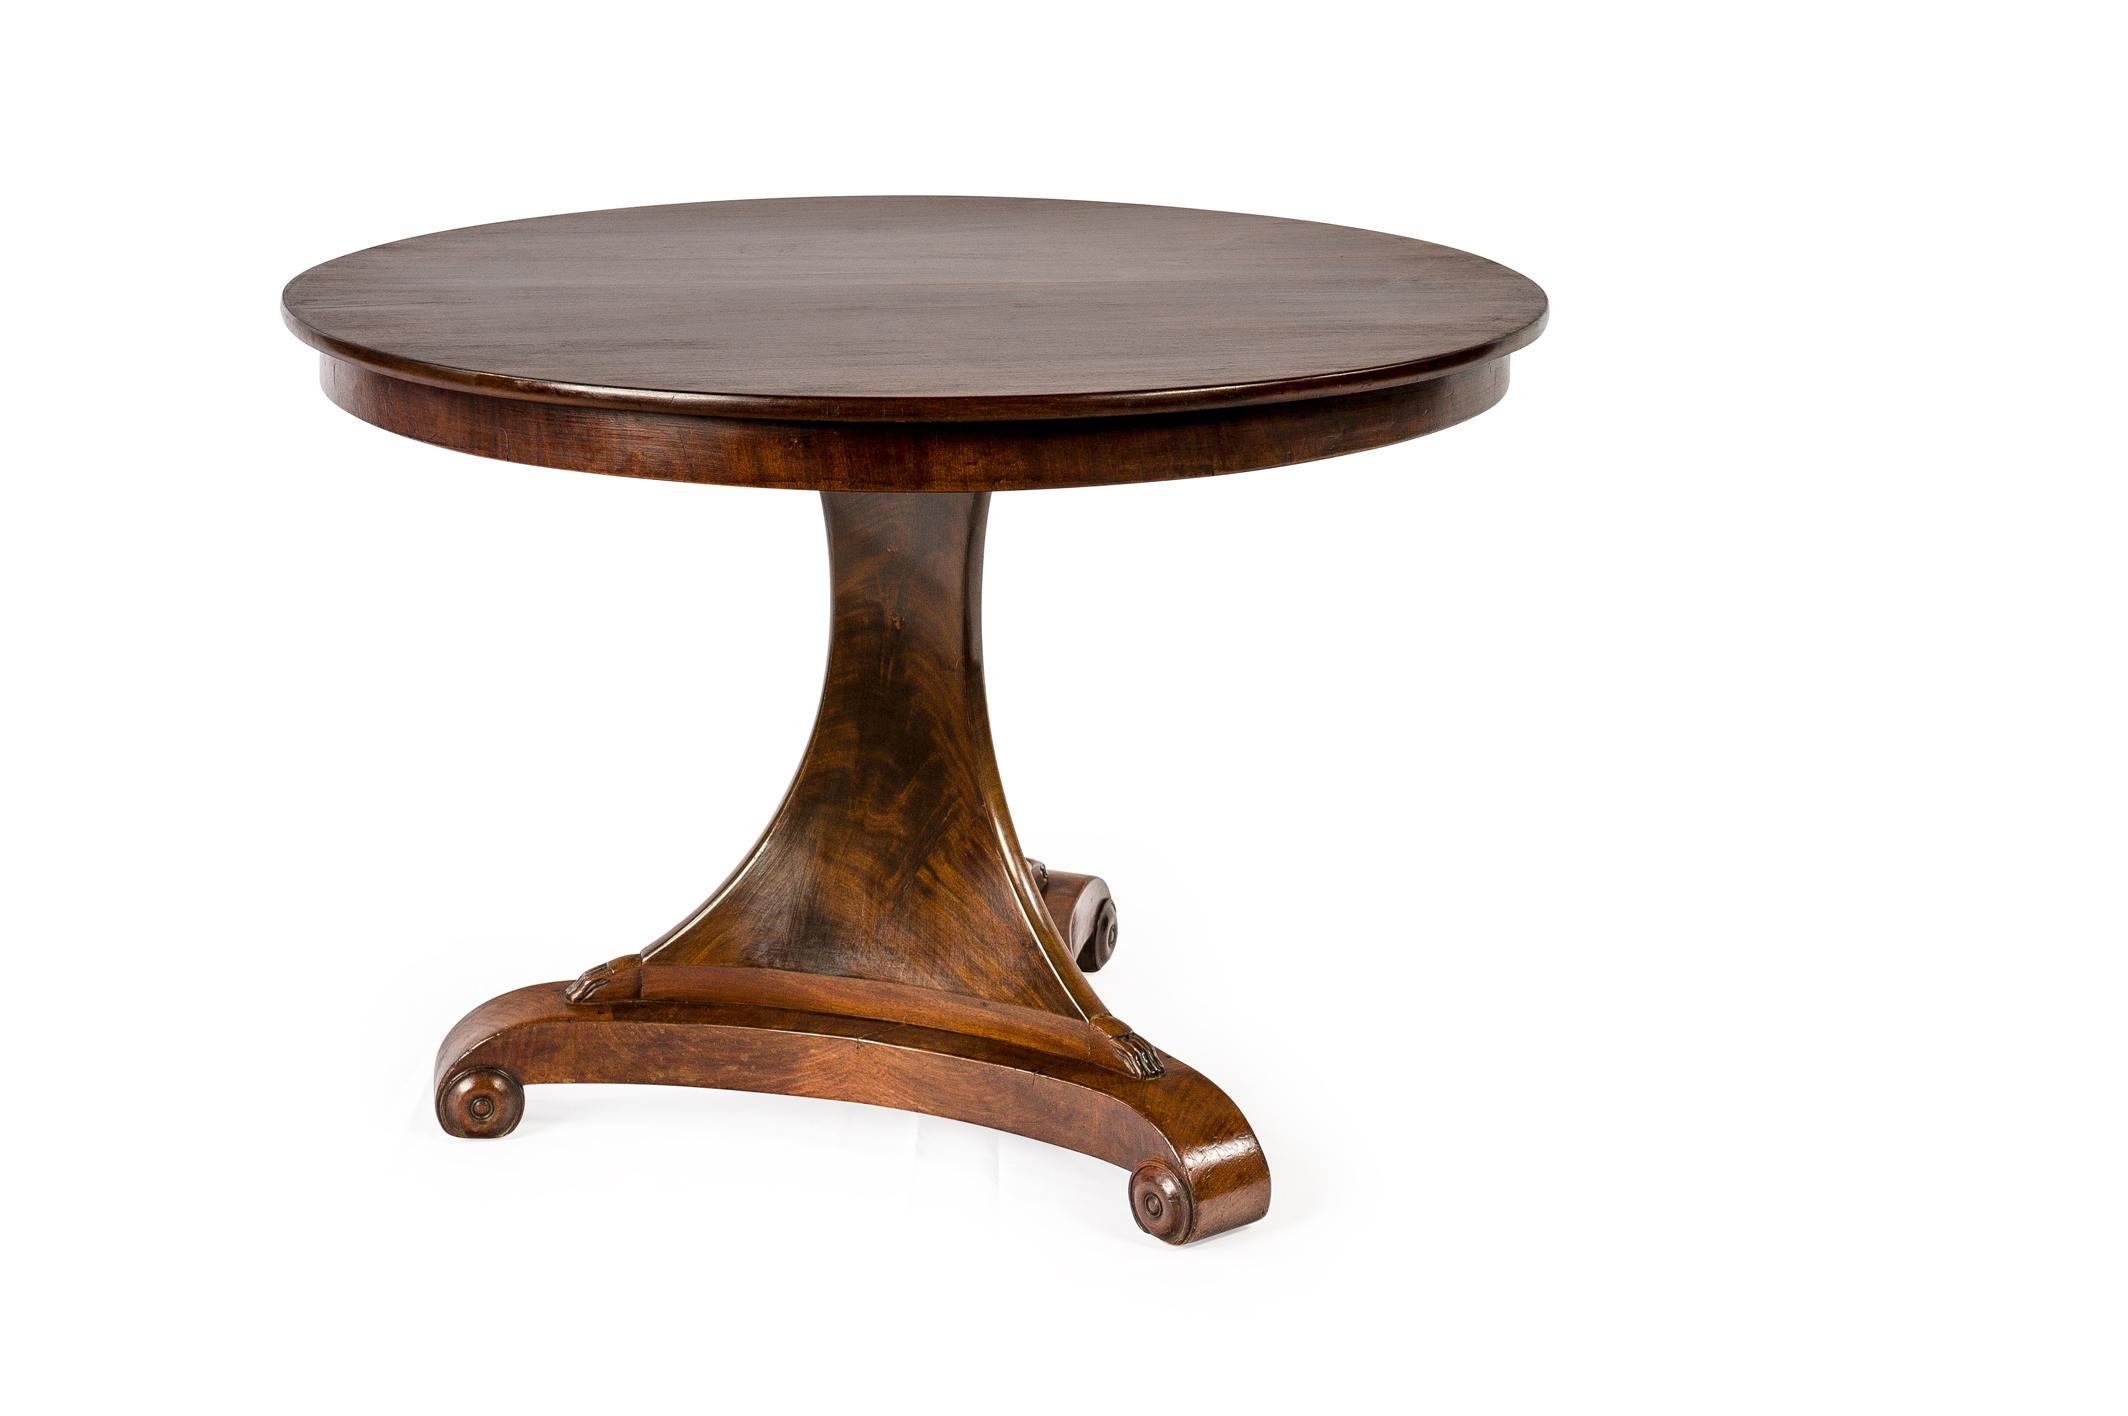 A beautiful round mahogany dining table on a trefoil platform base that ends in elegant scrolls. 
The base has a beautiful triangular column that ends in claw feet to support the tabletop. The tabletop is made in 0.8-inch thick solid mahogany in a